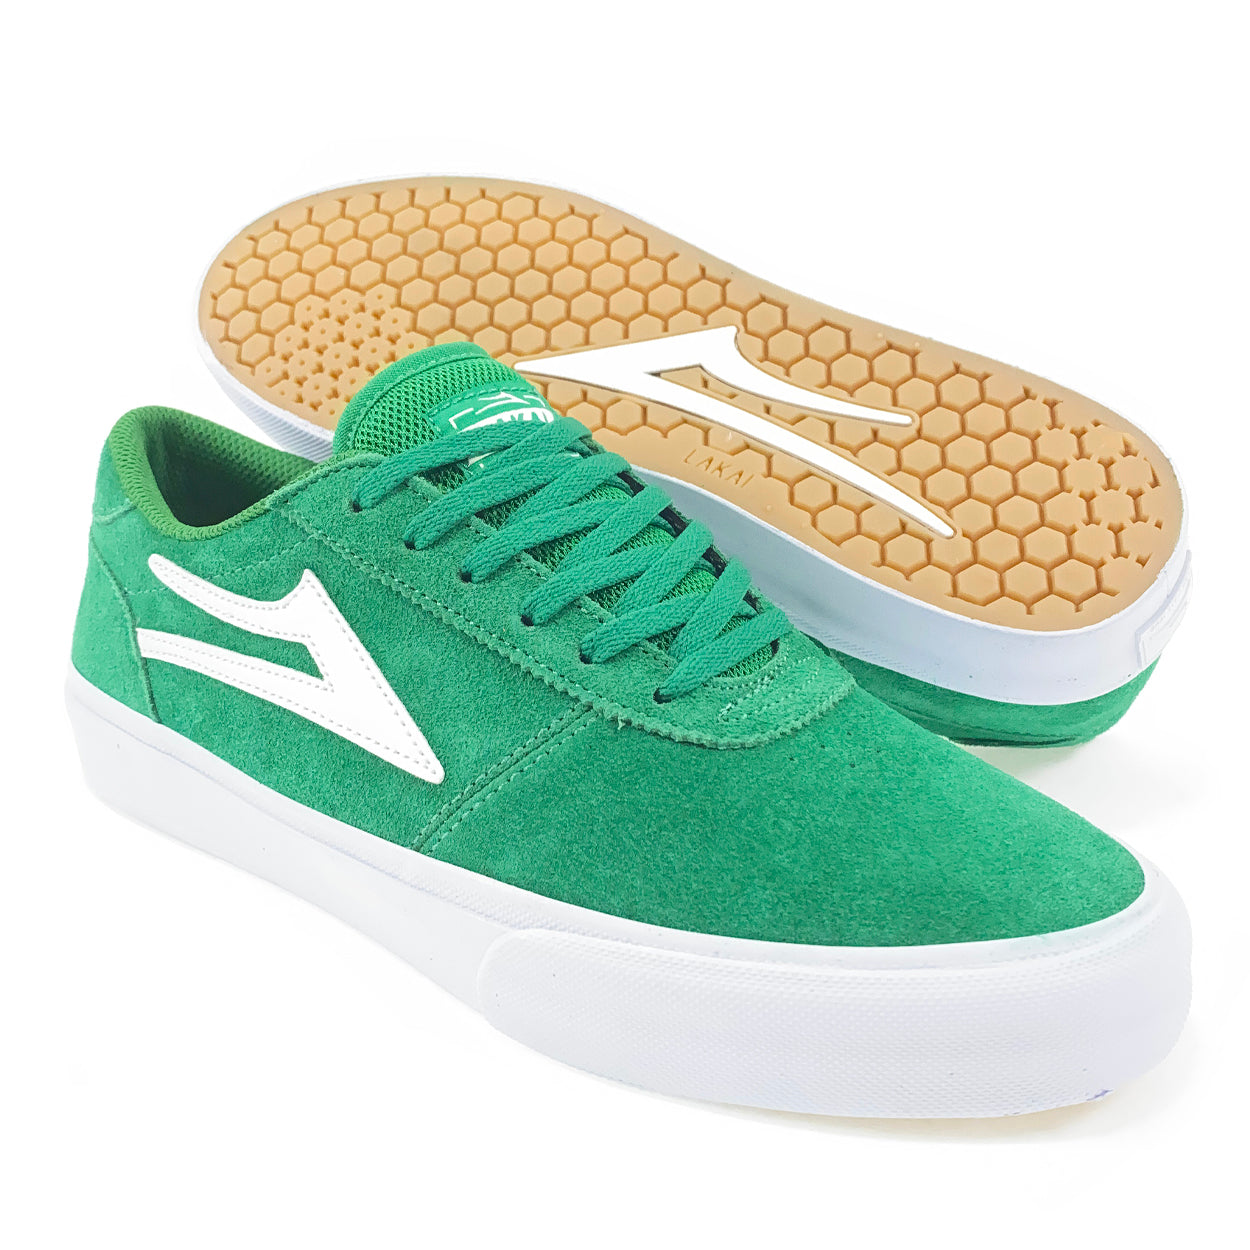 Lakai Manchester Shoes - Grass Suede - Prime Delux Store